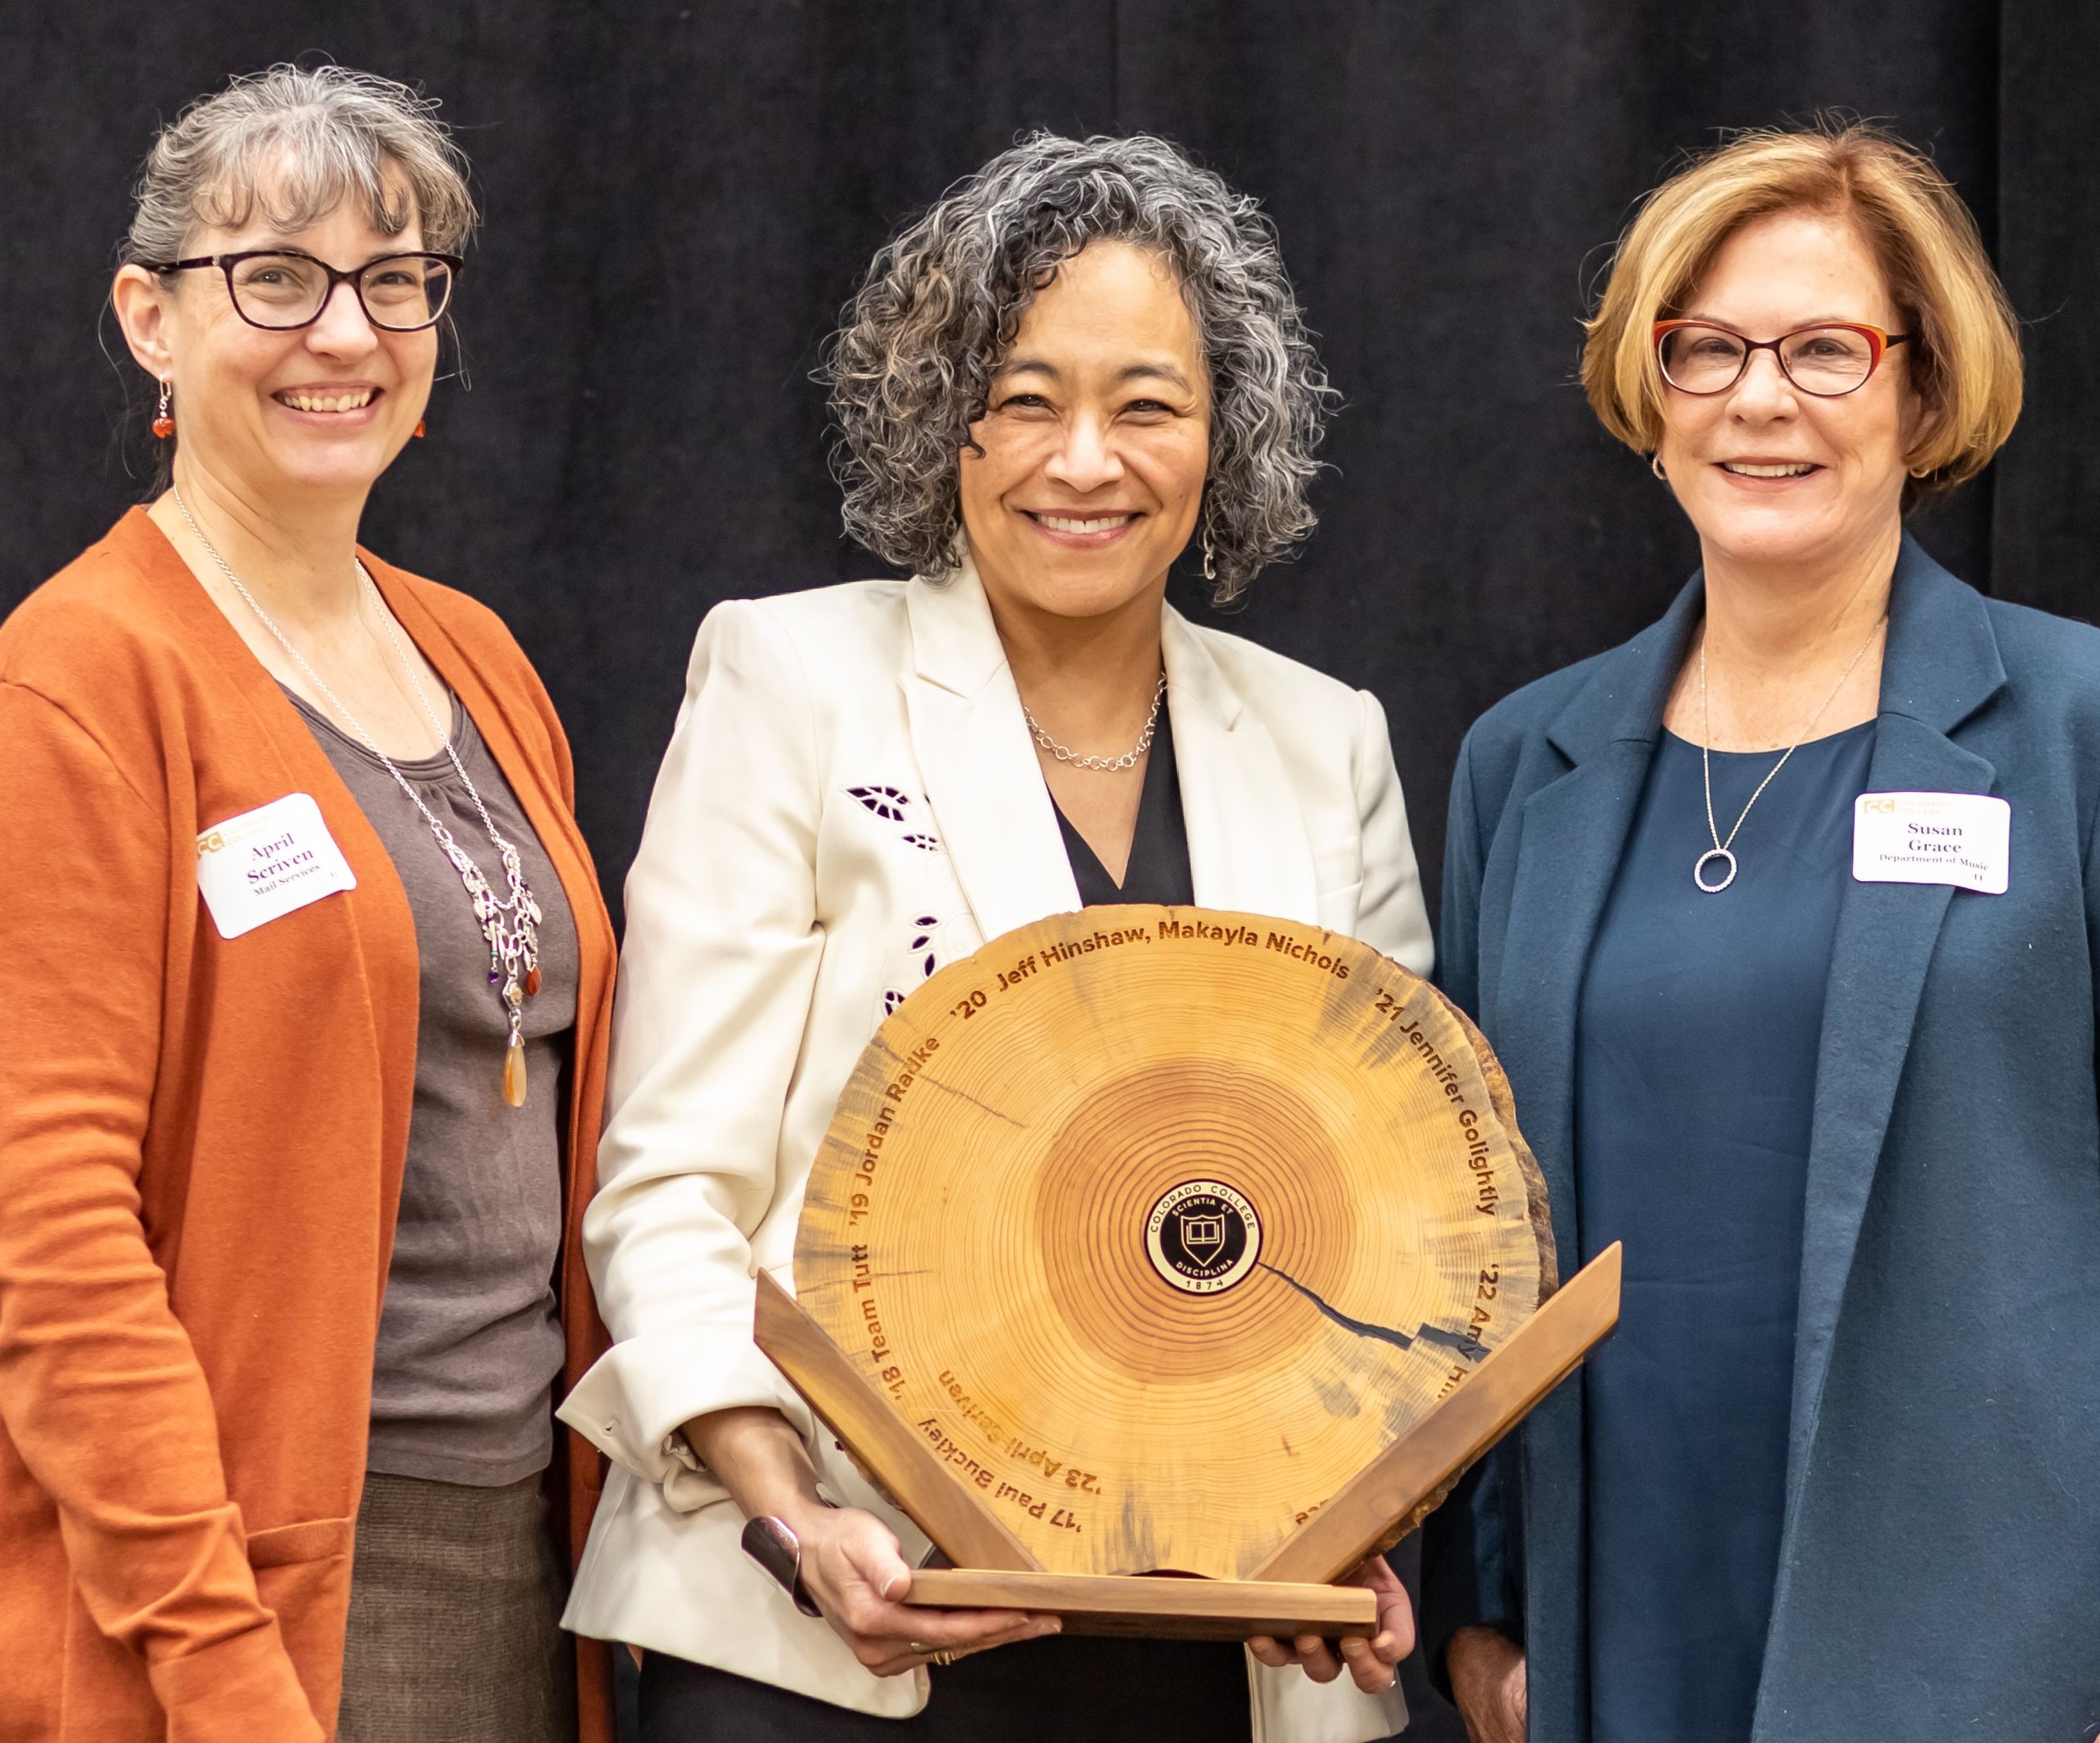 Grace awarded Jane Cauvel Cultivating Collaboration and Community Presidential Leadership Award